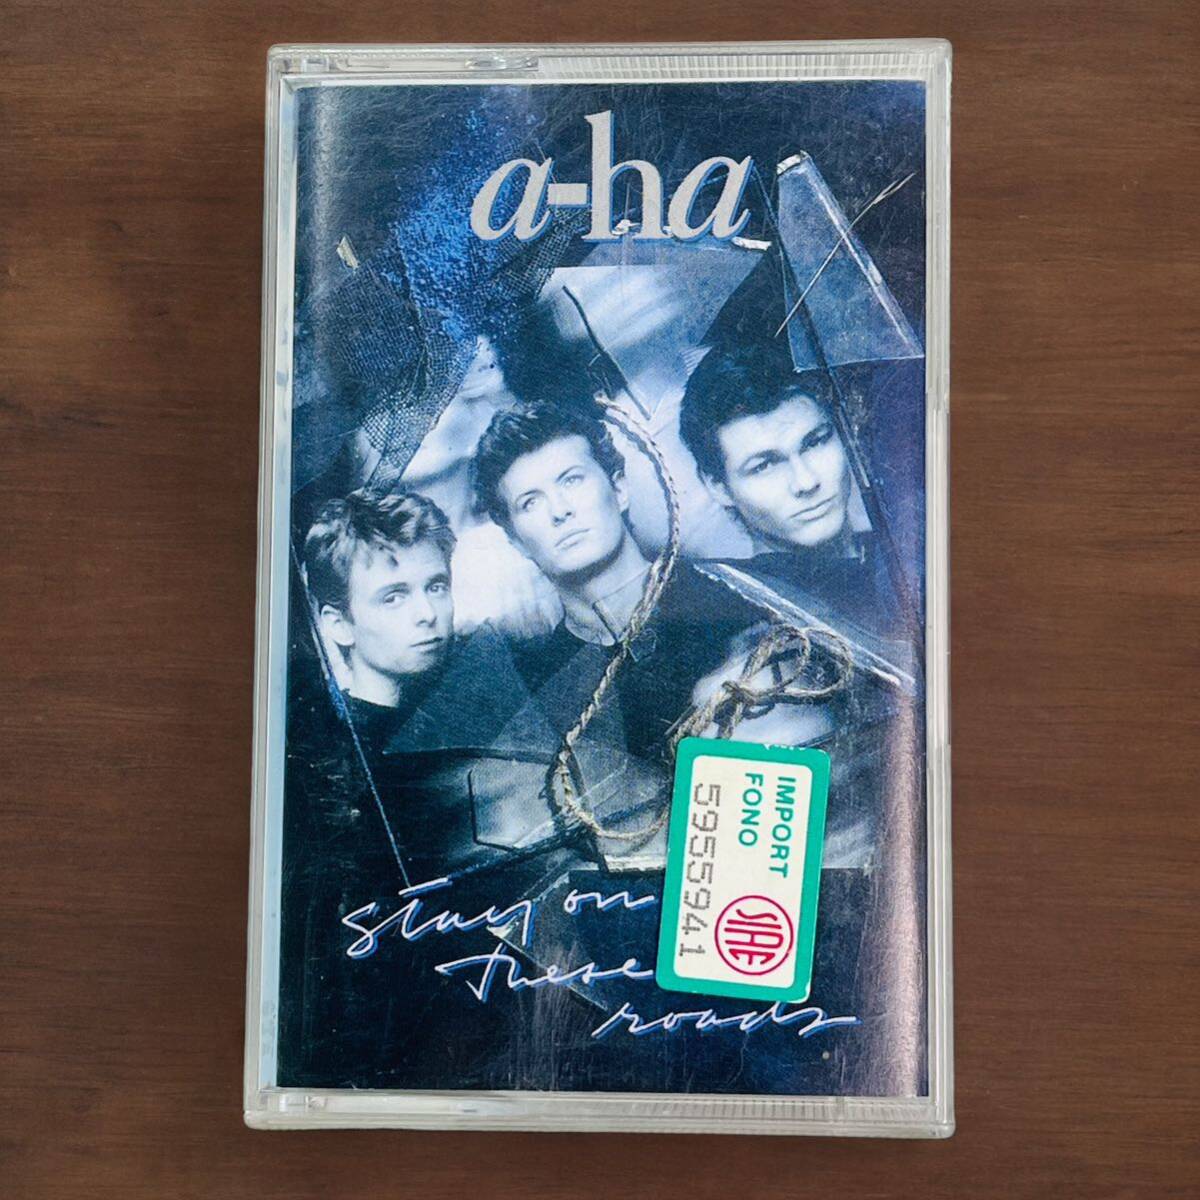 a-ha/stay on these roads all 10 bending 3rd album cassette tape 